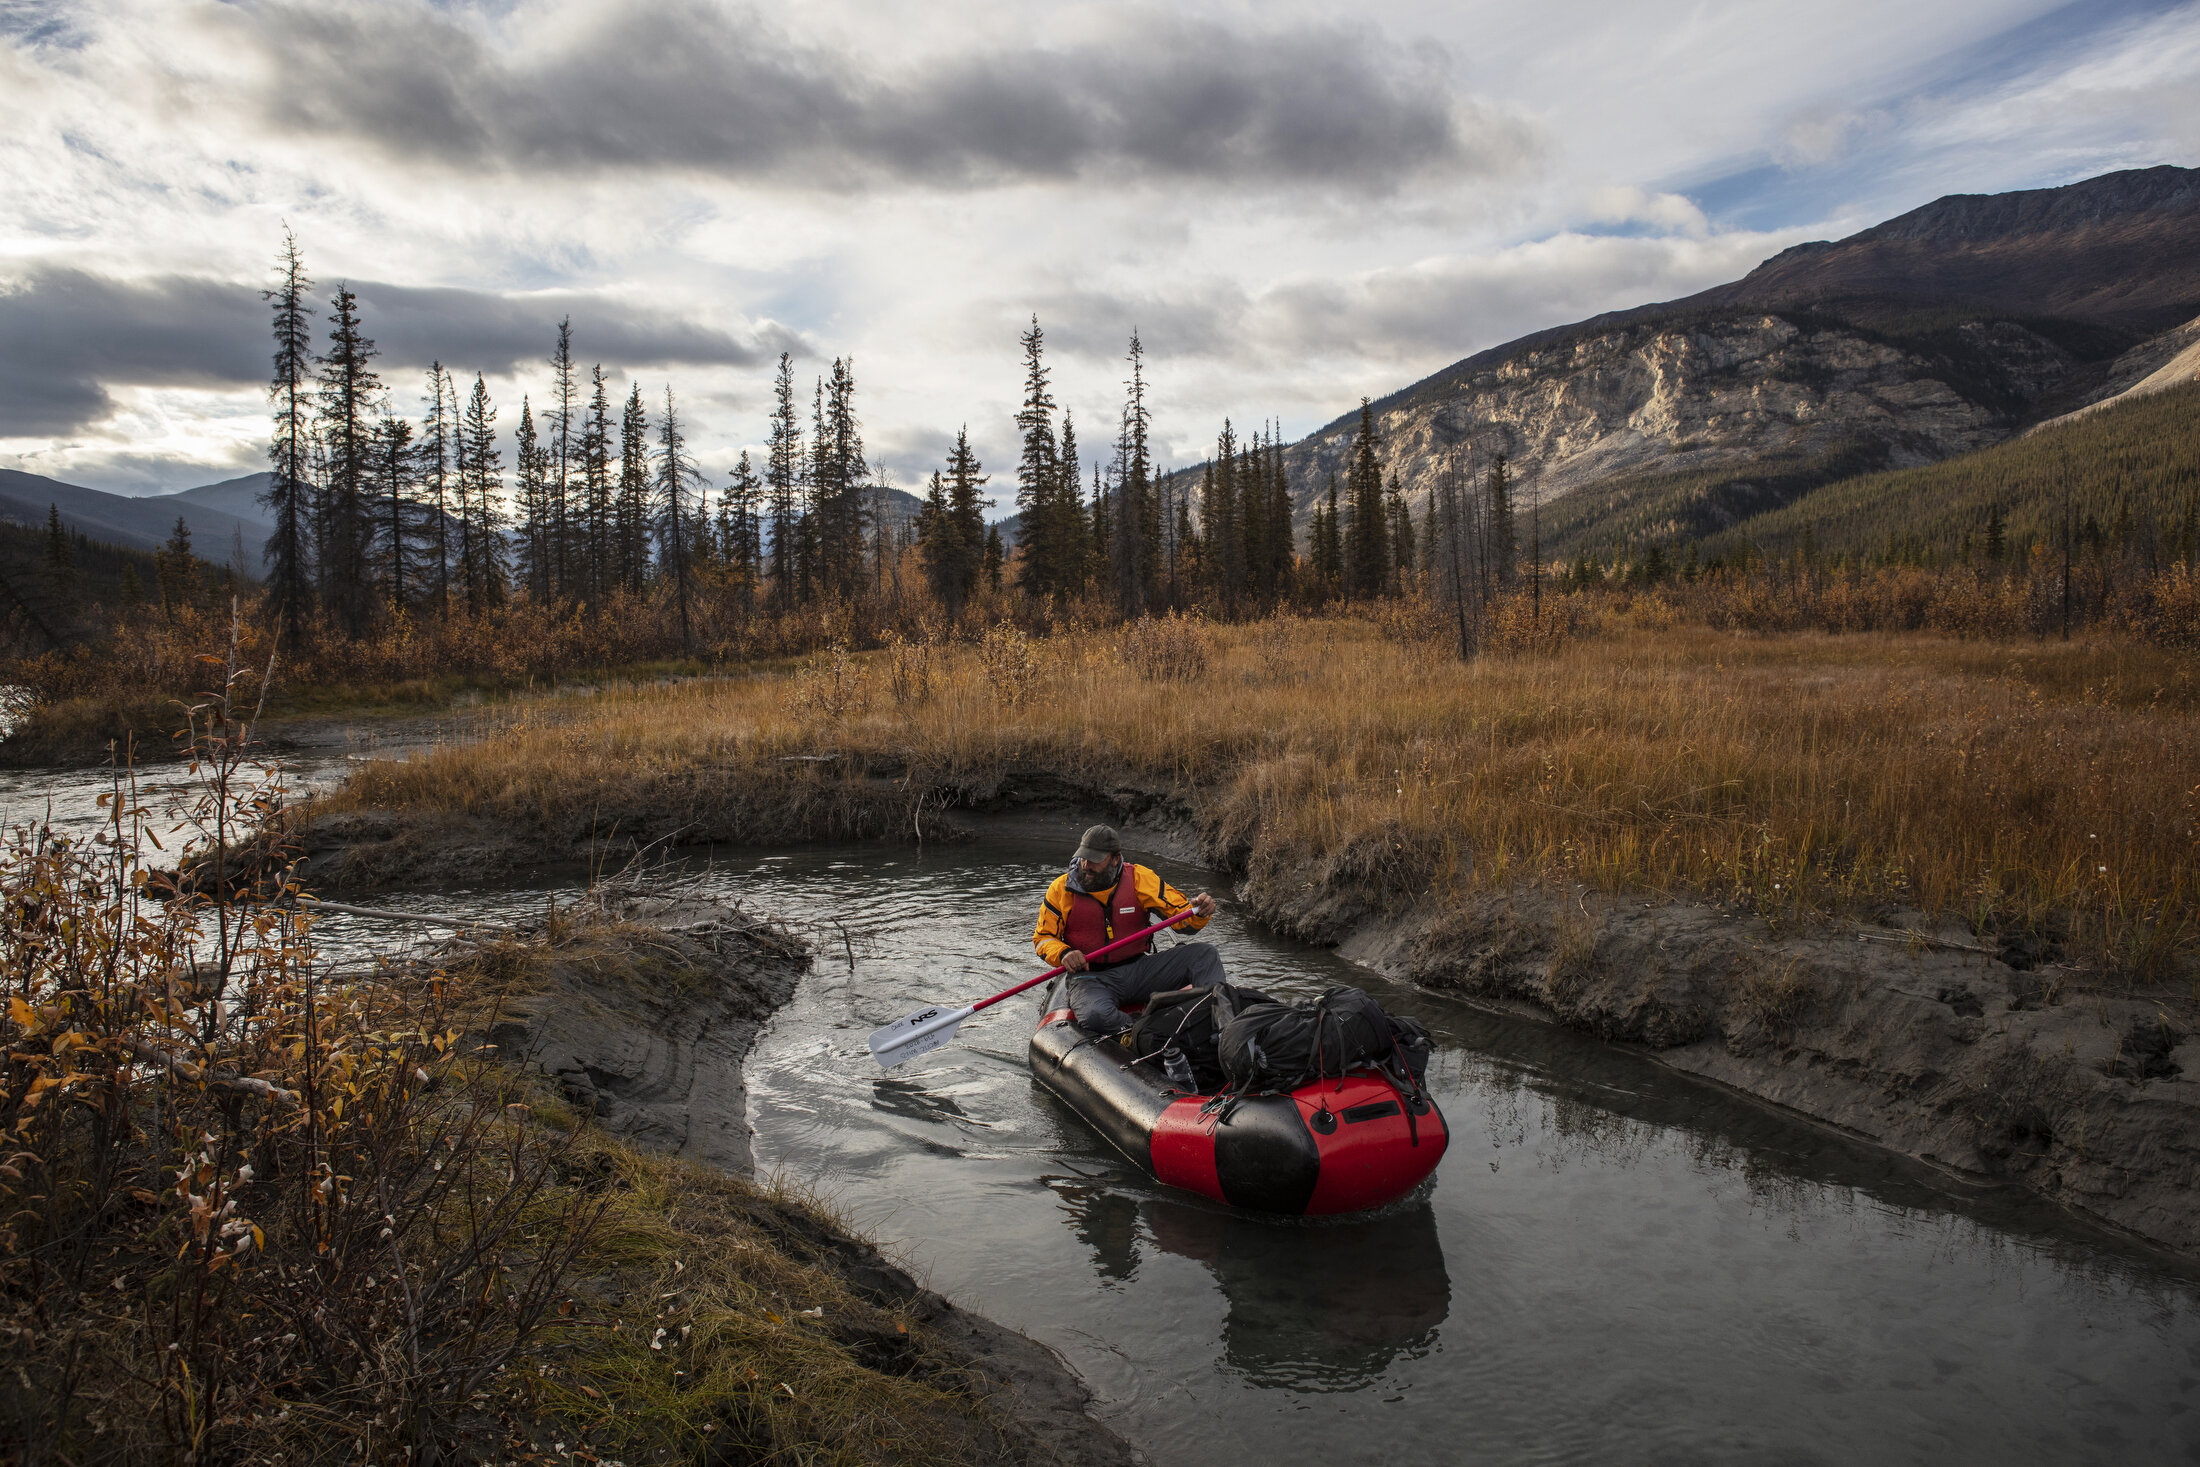  Pack-rafting to explore an overgrown beaver dam waterway expedition that follows ecologist Ken Tape, guide Michael Wald (Pictured here) and National Geographic writer Craig Welch as they look at the ecological impact of beavers in the Arctic for app